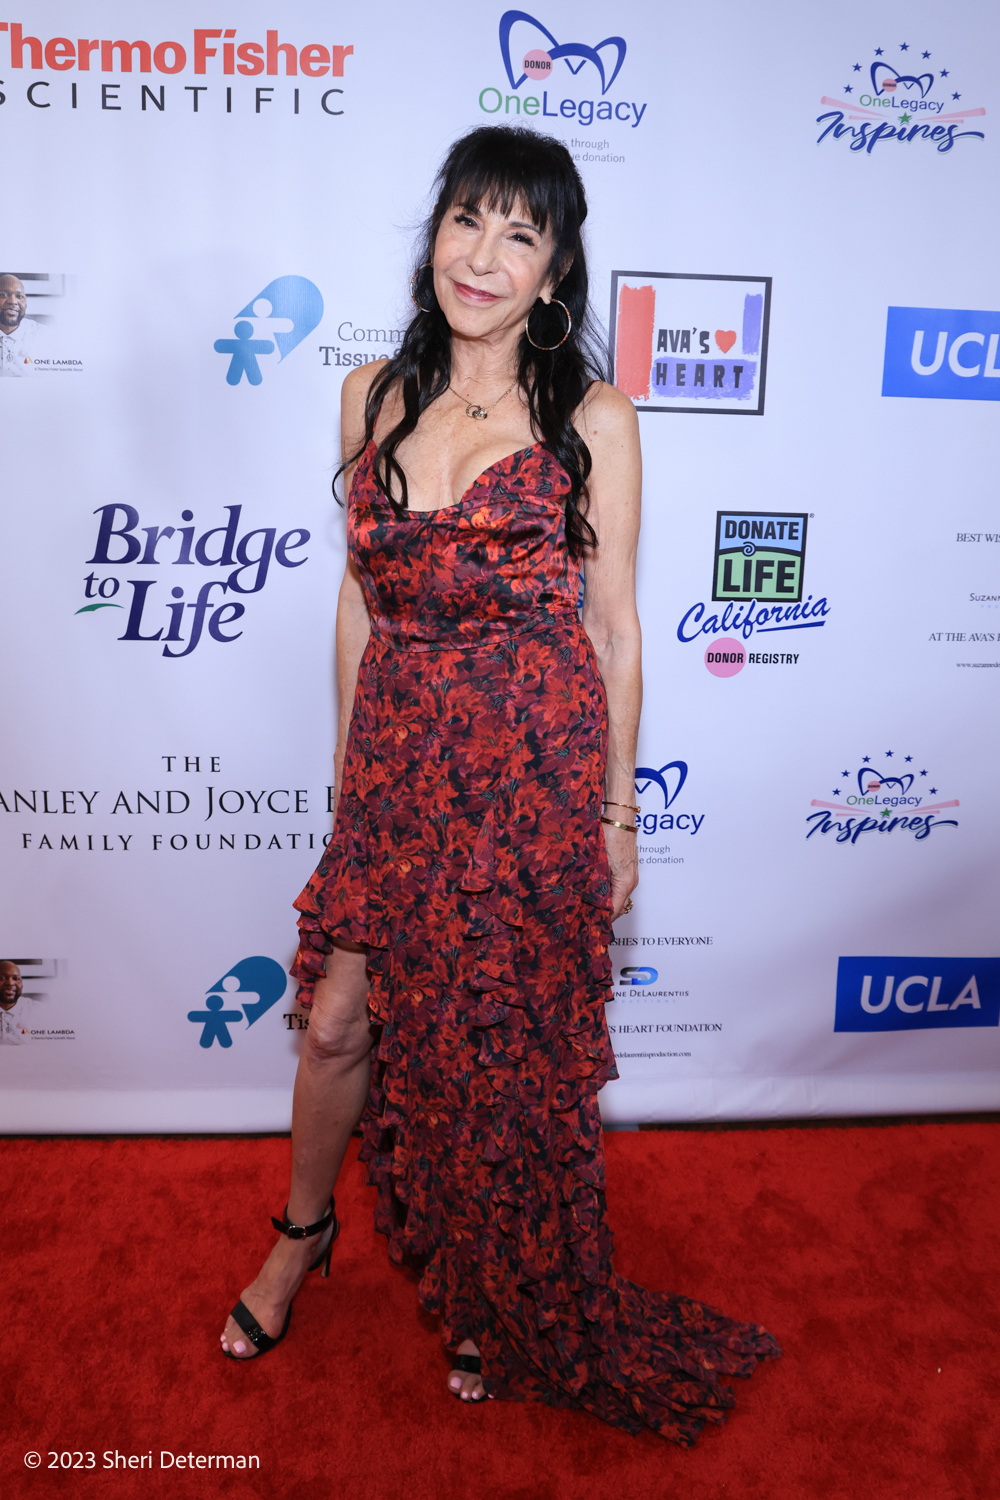 Ava Kaufman, Founder/CEO of Ava's Heart, attending the Ava's Heart Gala & LegacyOne Inspire Awards at the Taglyan Complex in Los Angeles, California. Credit: Sheri Determan